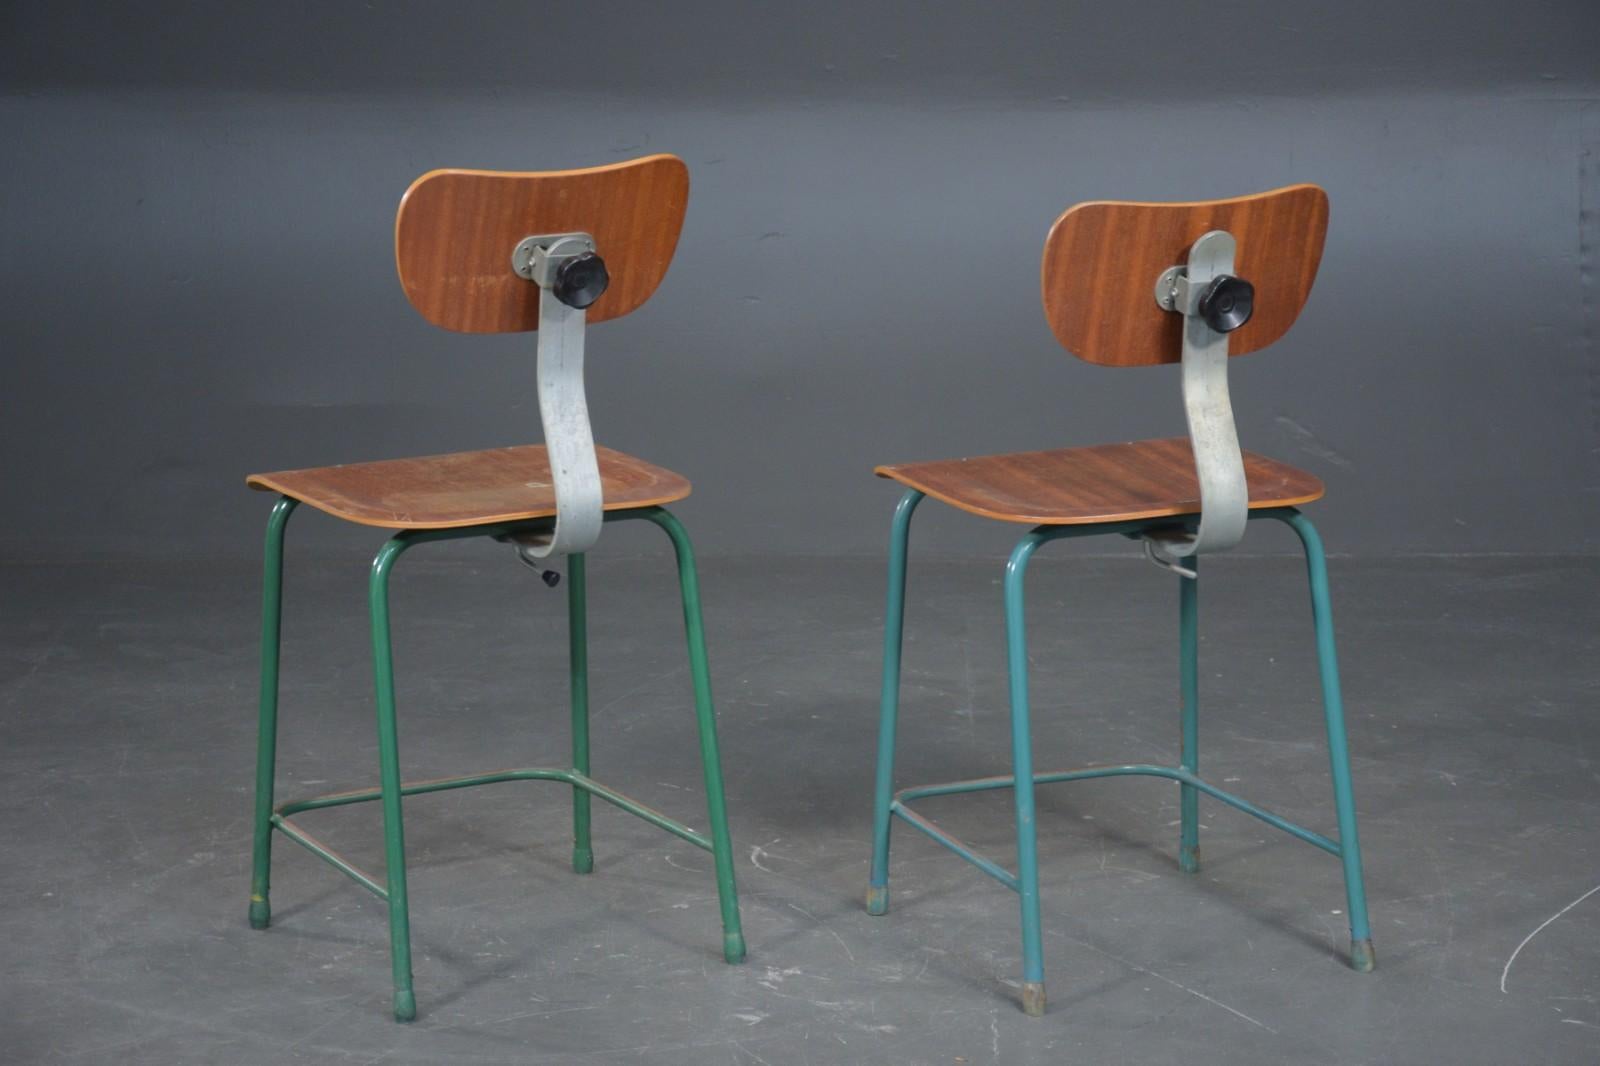 Industrial chairs / work chairs. Seat and back of veneered teak, frame and legs of green lacquered steel. Adjustable back, 1950-1960, H. 82 cm. Seat height 49 cm. Traces of wear, scratches, peeling and rust. Set of two.